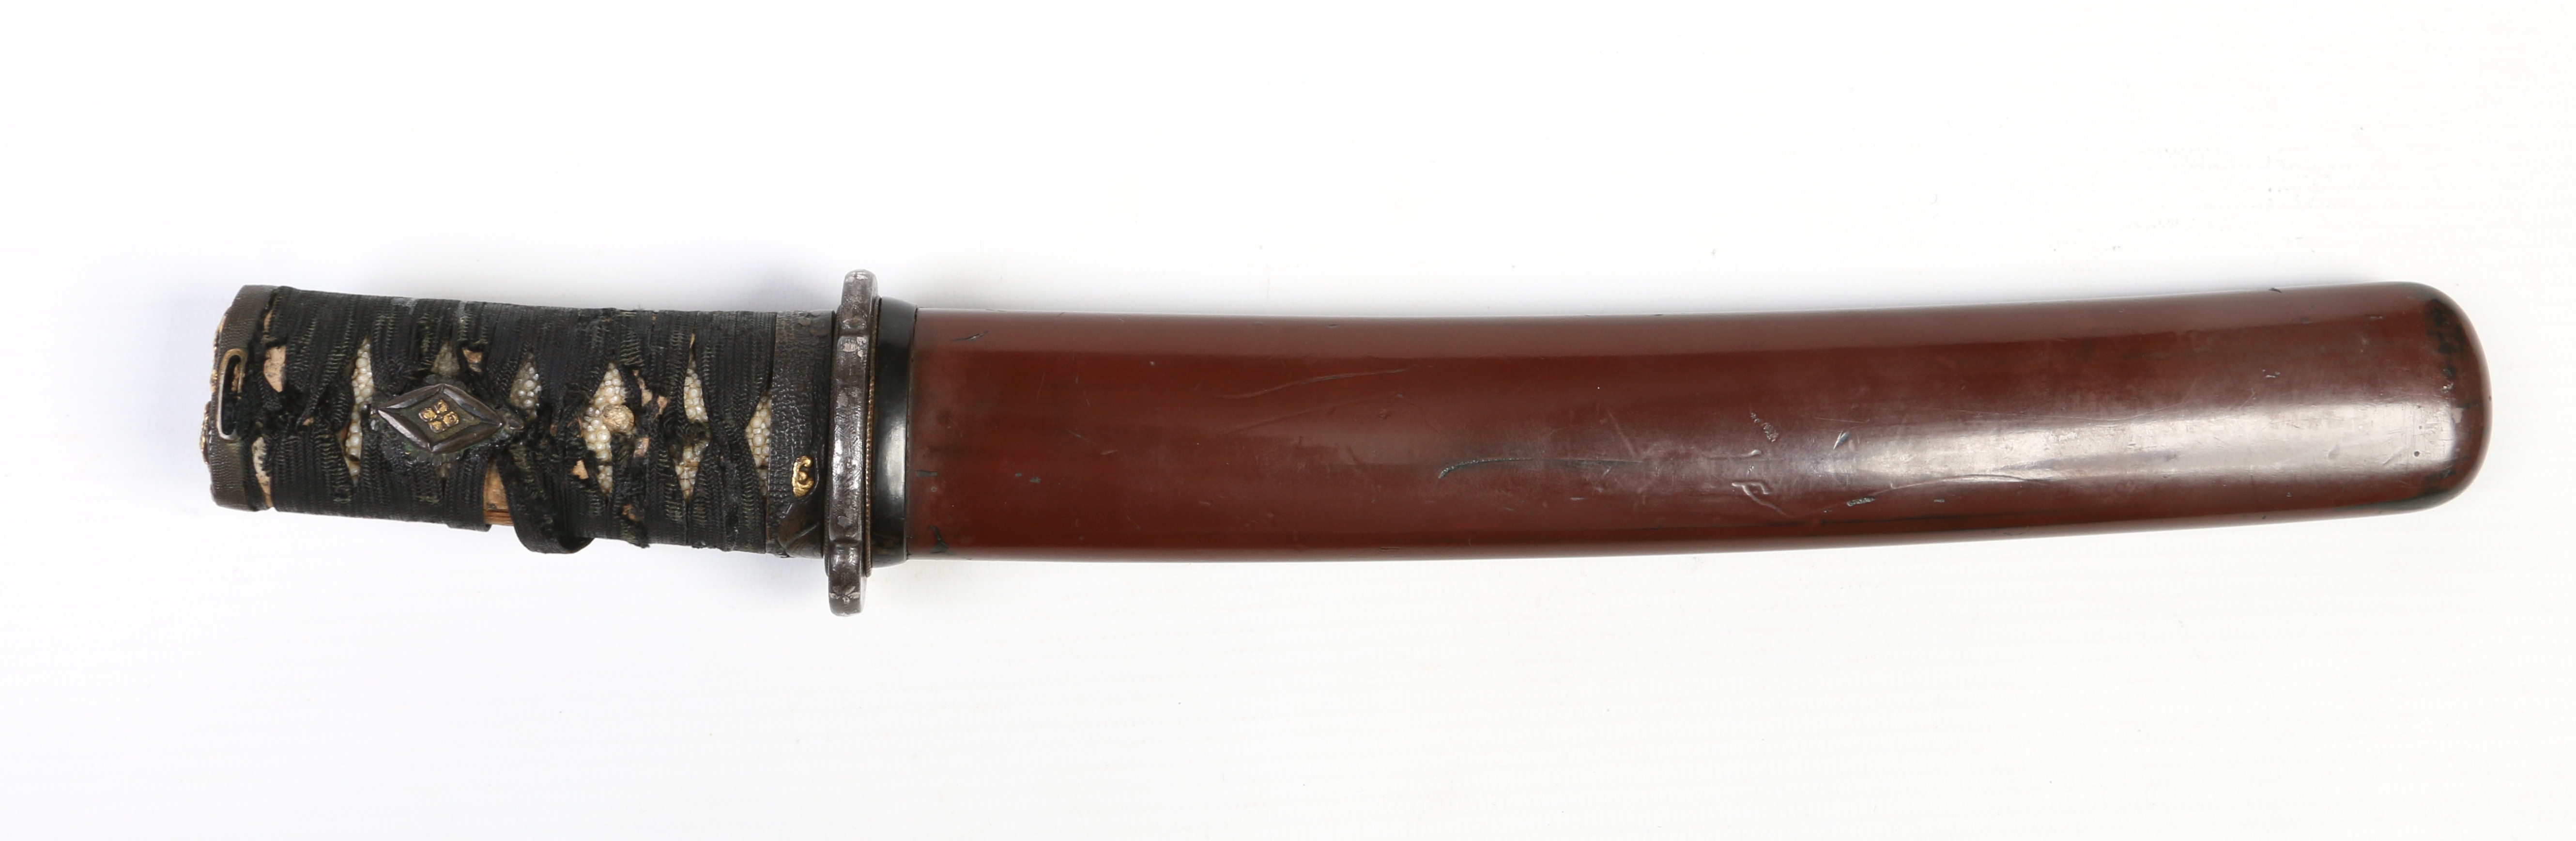 A Japanese Edo period tanto dagger in lacquered sheath. - Image 2 of 12